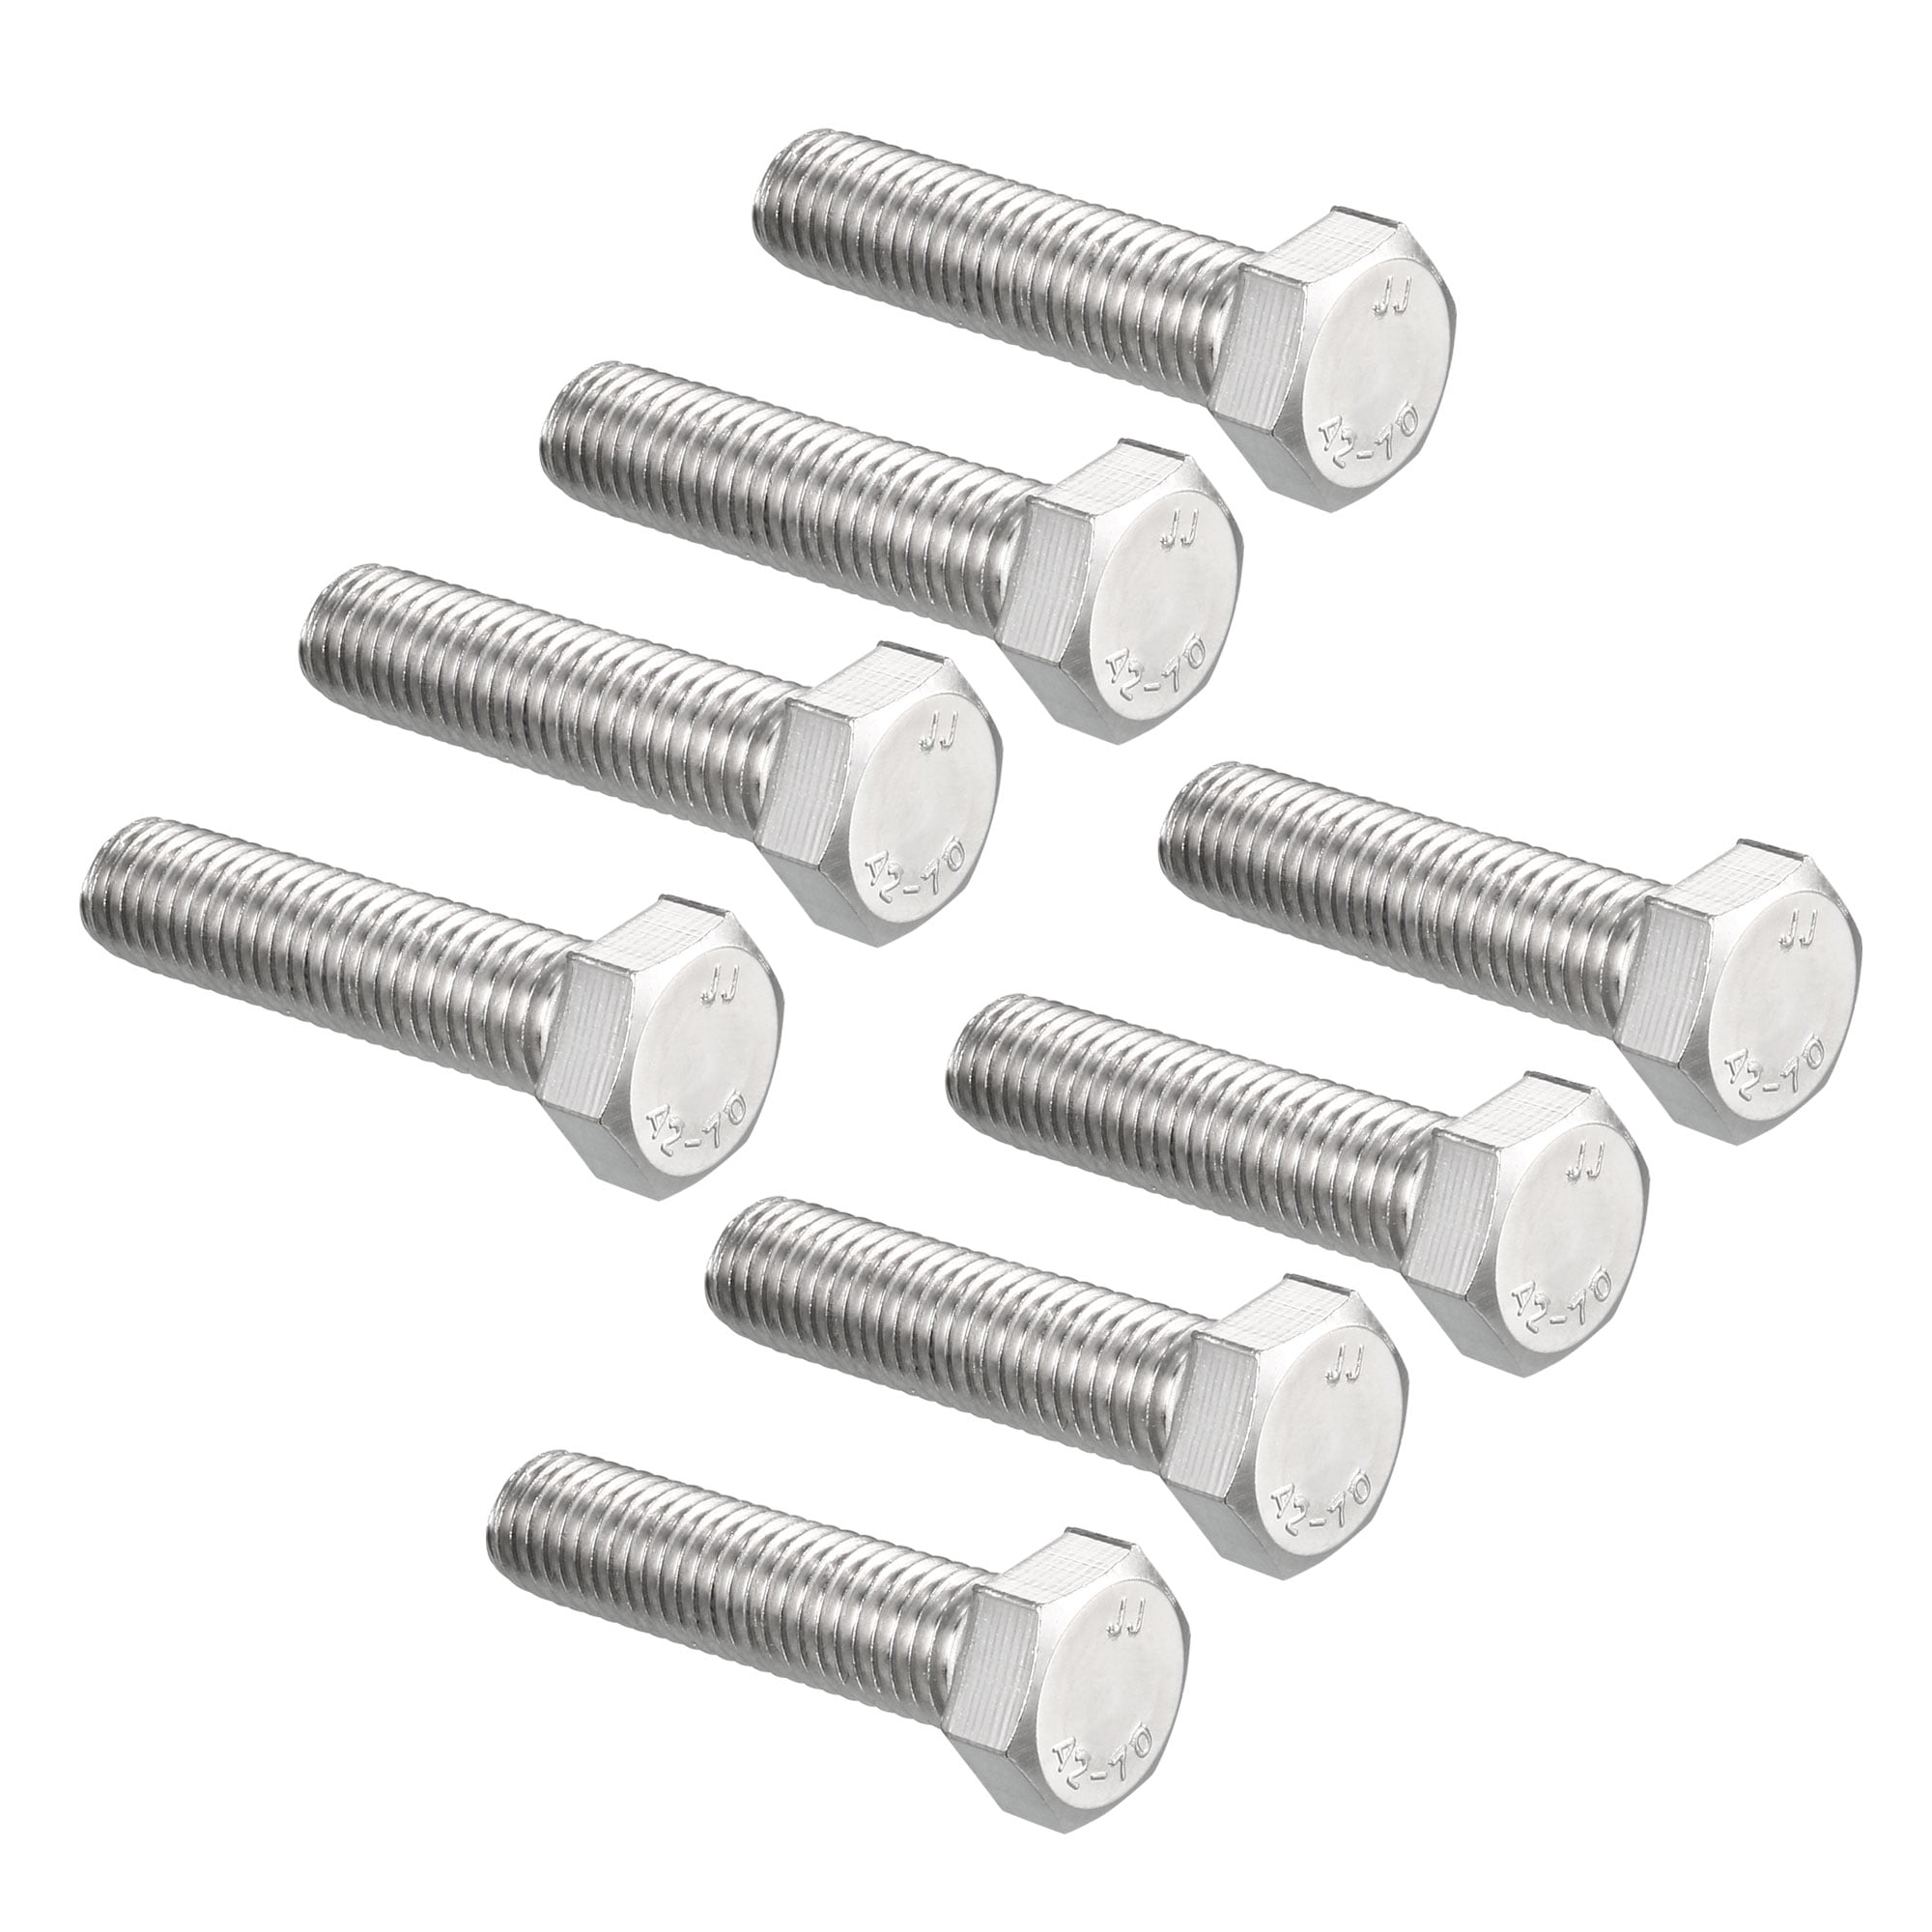 Hex Screw Bolt Metric M12x50mm 304 Stainless Steel Fully Threaded Bolts 8pcs 